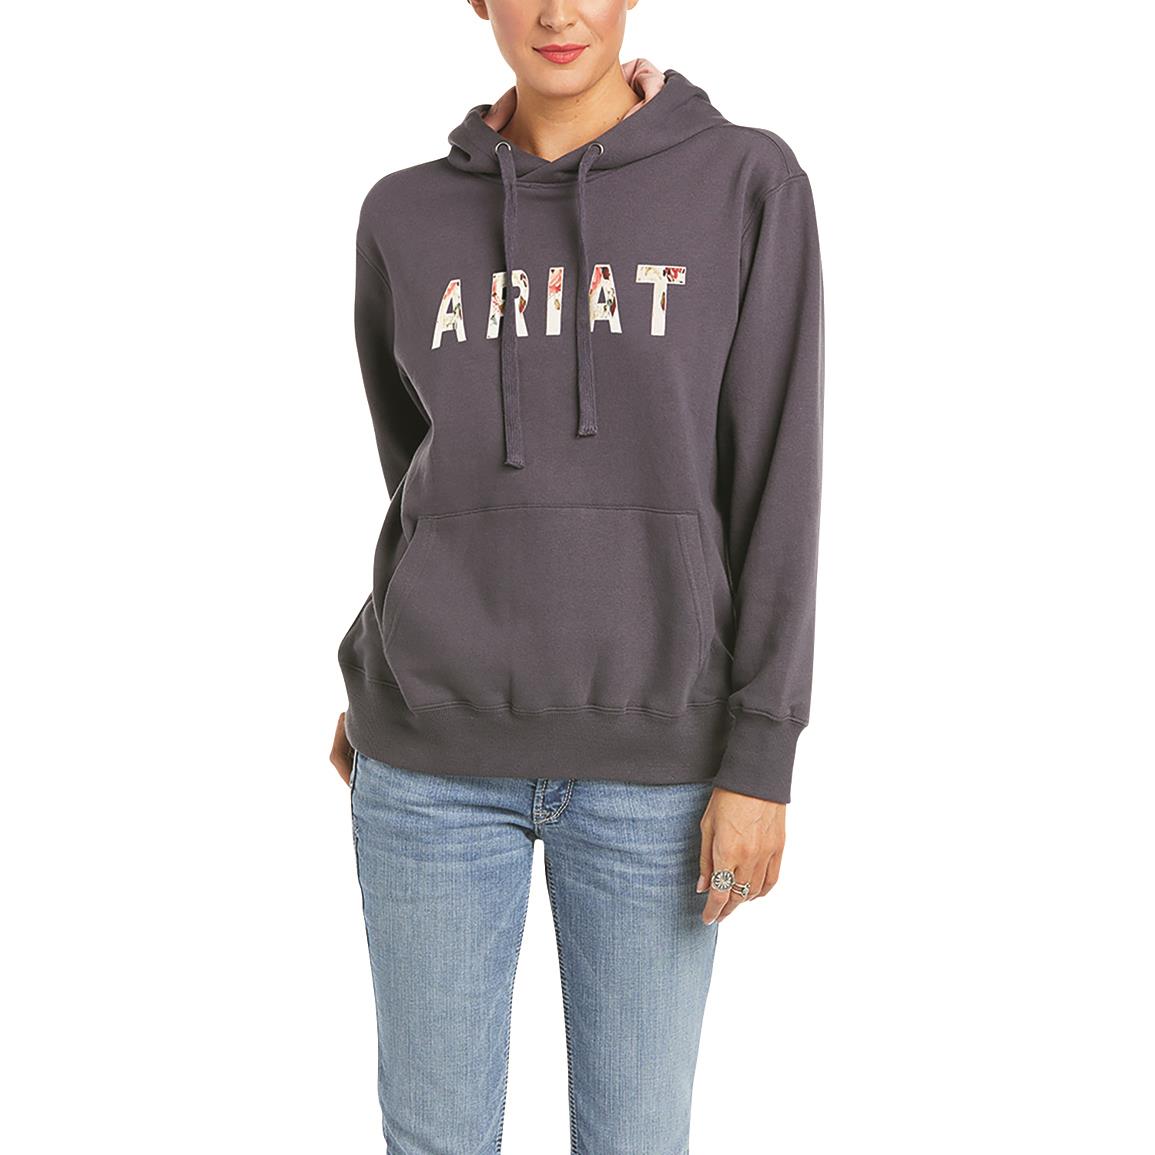 Ariat Women's REAL Floral Hoodie, Periscope